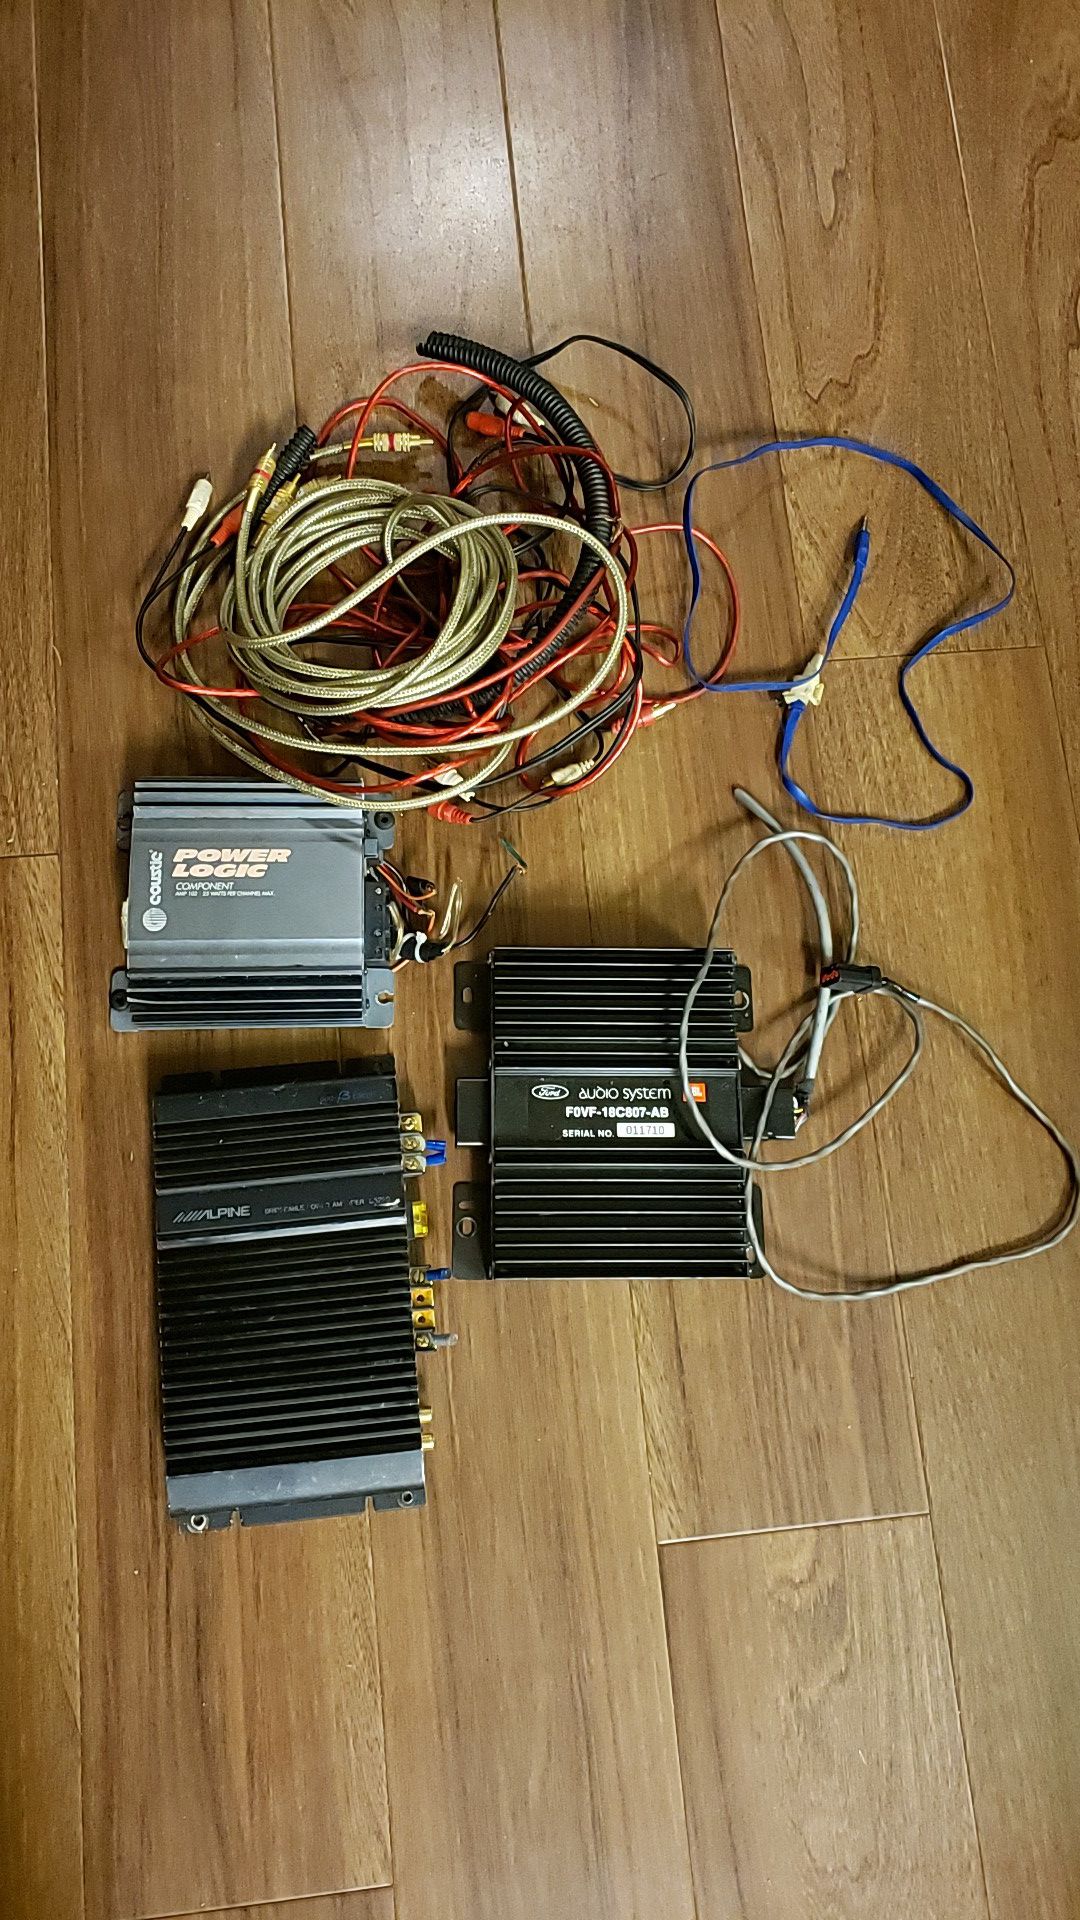 Alpine amplifier 3522s and cables